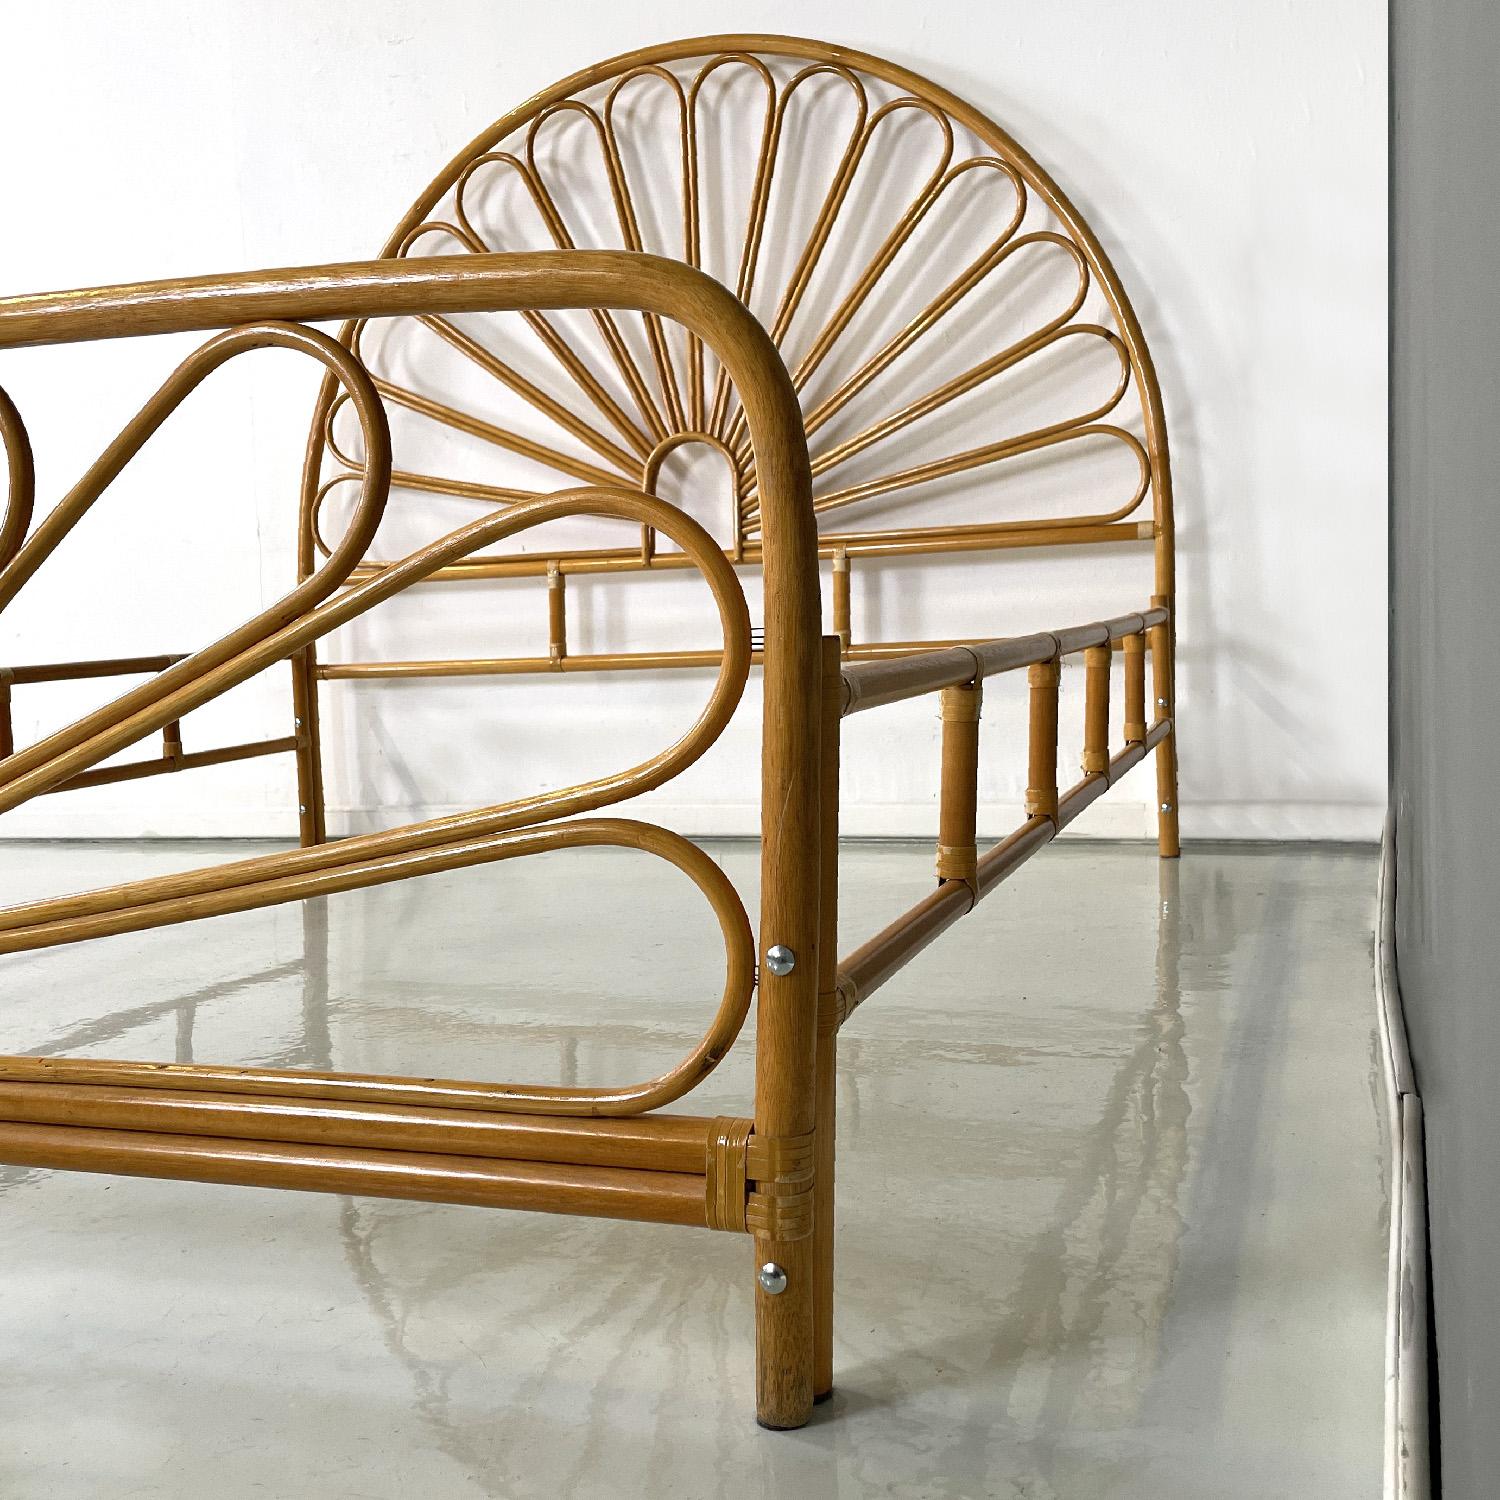 Italian mid-century modern bamboo double bed with decorations, 1950s For Sale 5